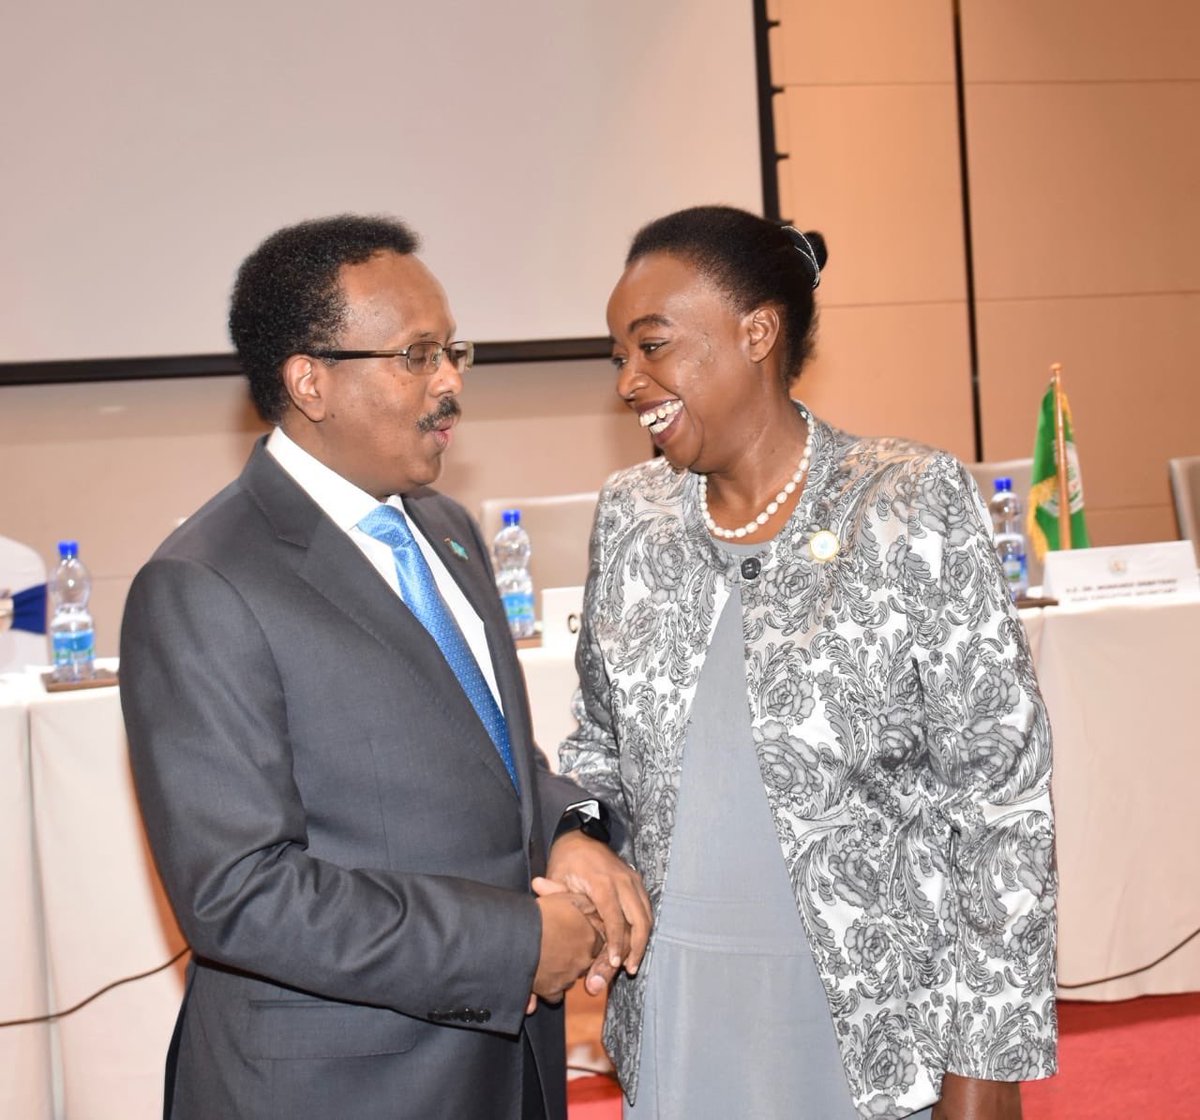 Bringing back our Dignity in #Somalia my ass #Farmaajo being ordered around by Monica Juma at the IGAD conference